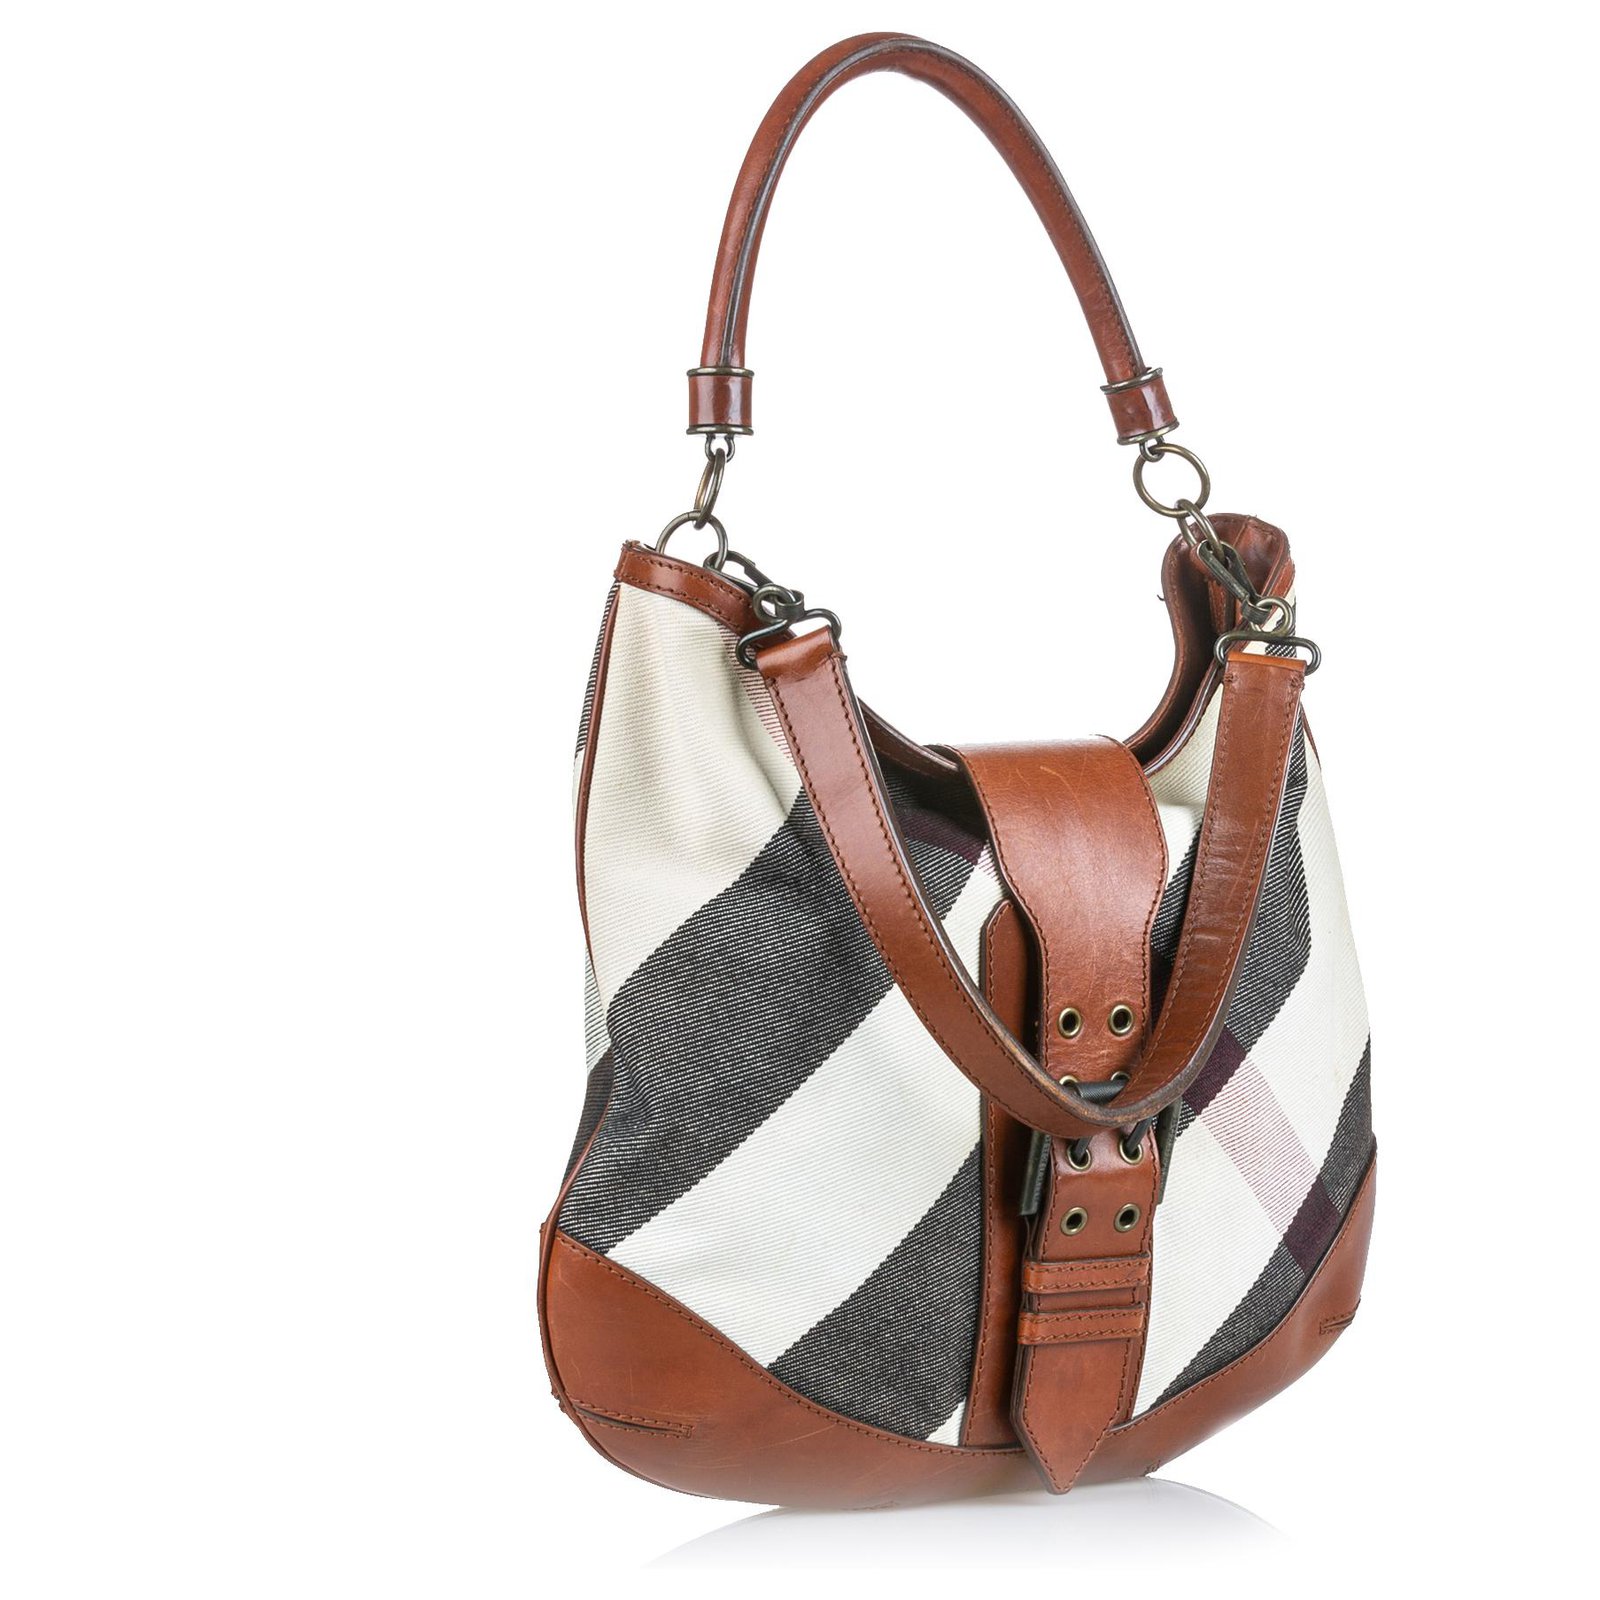 Burberry Beige/Brown Mega Check Canvas and Leather Lowry Tote Burberry